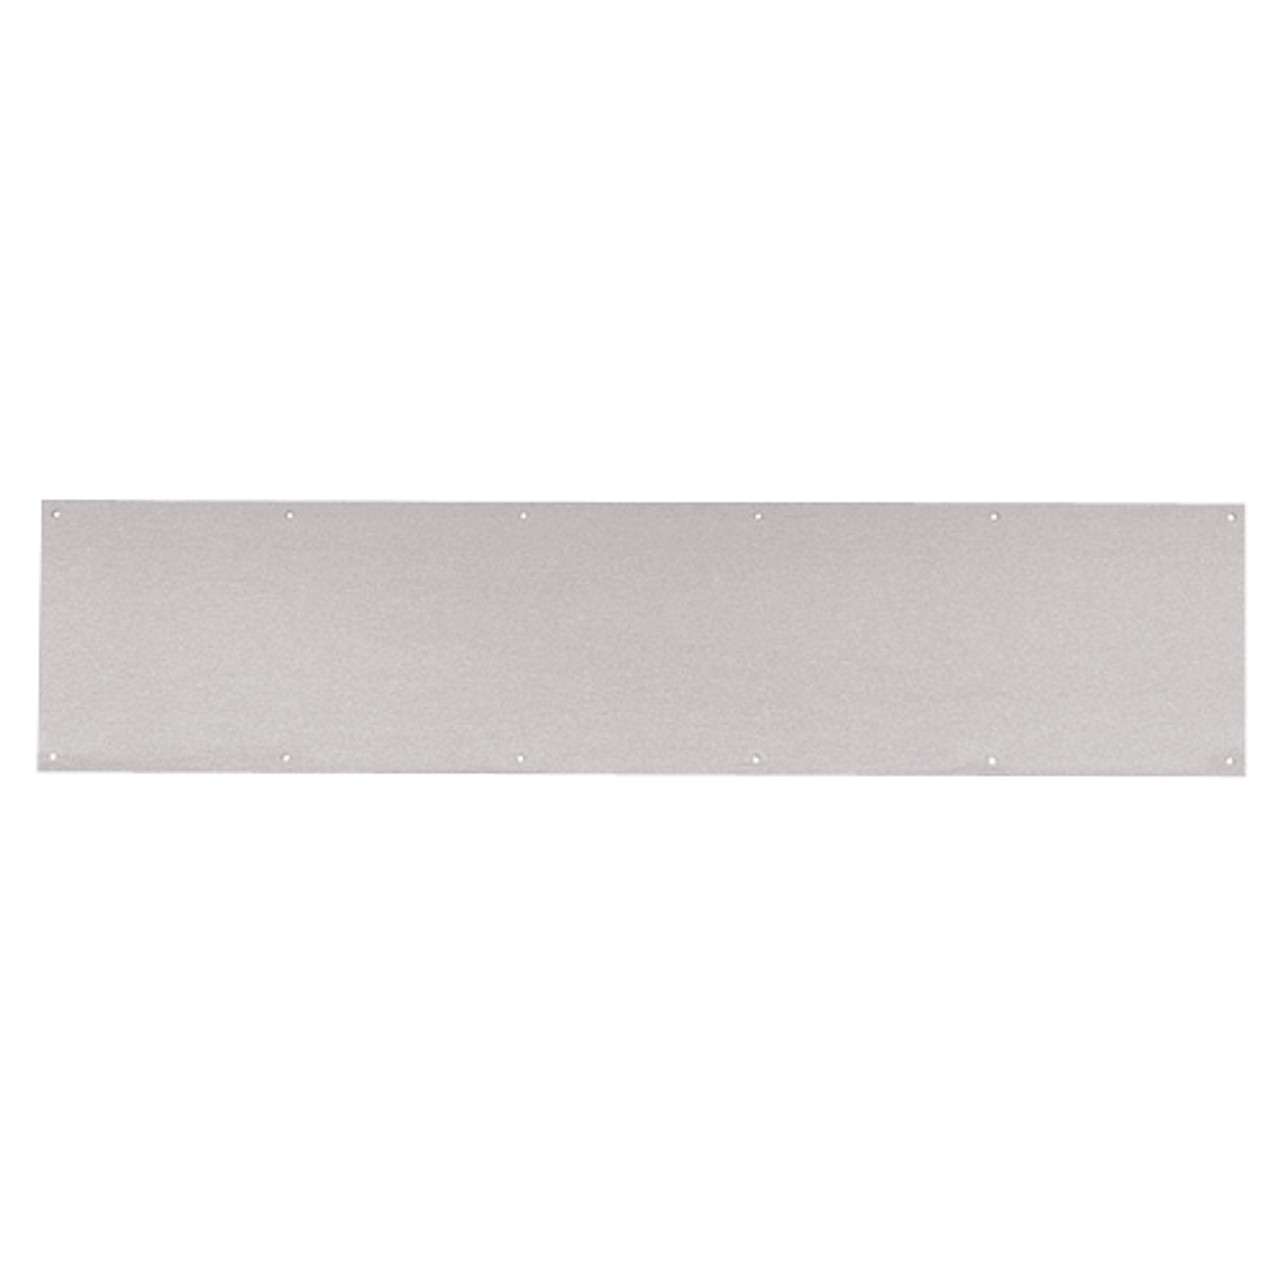 8400-US32D-16x30-B-CS Ives 8400 Series Protection Plate in Satin Stainless Steel